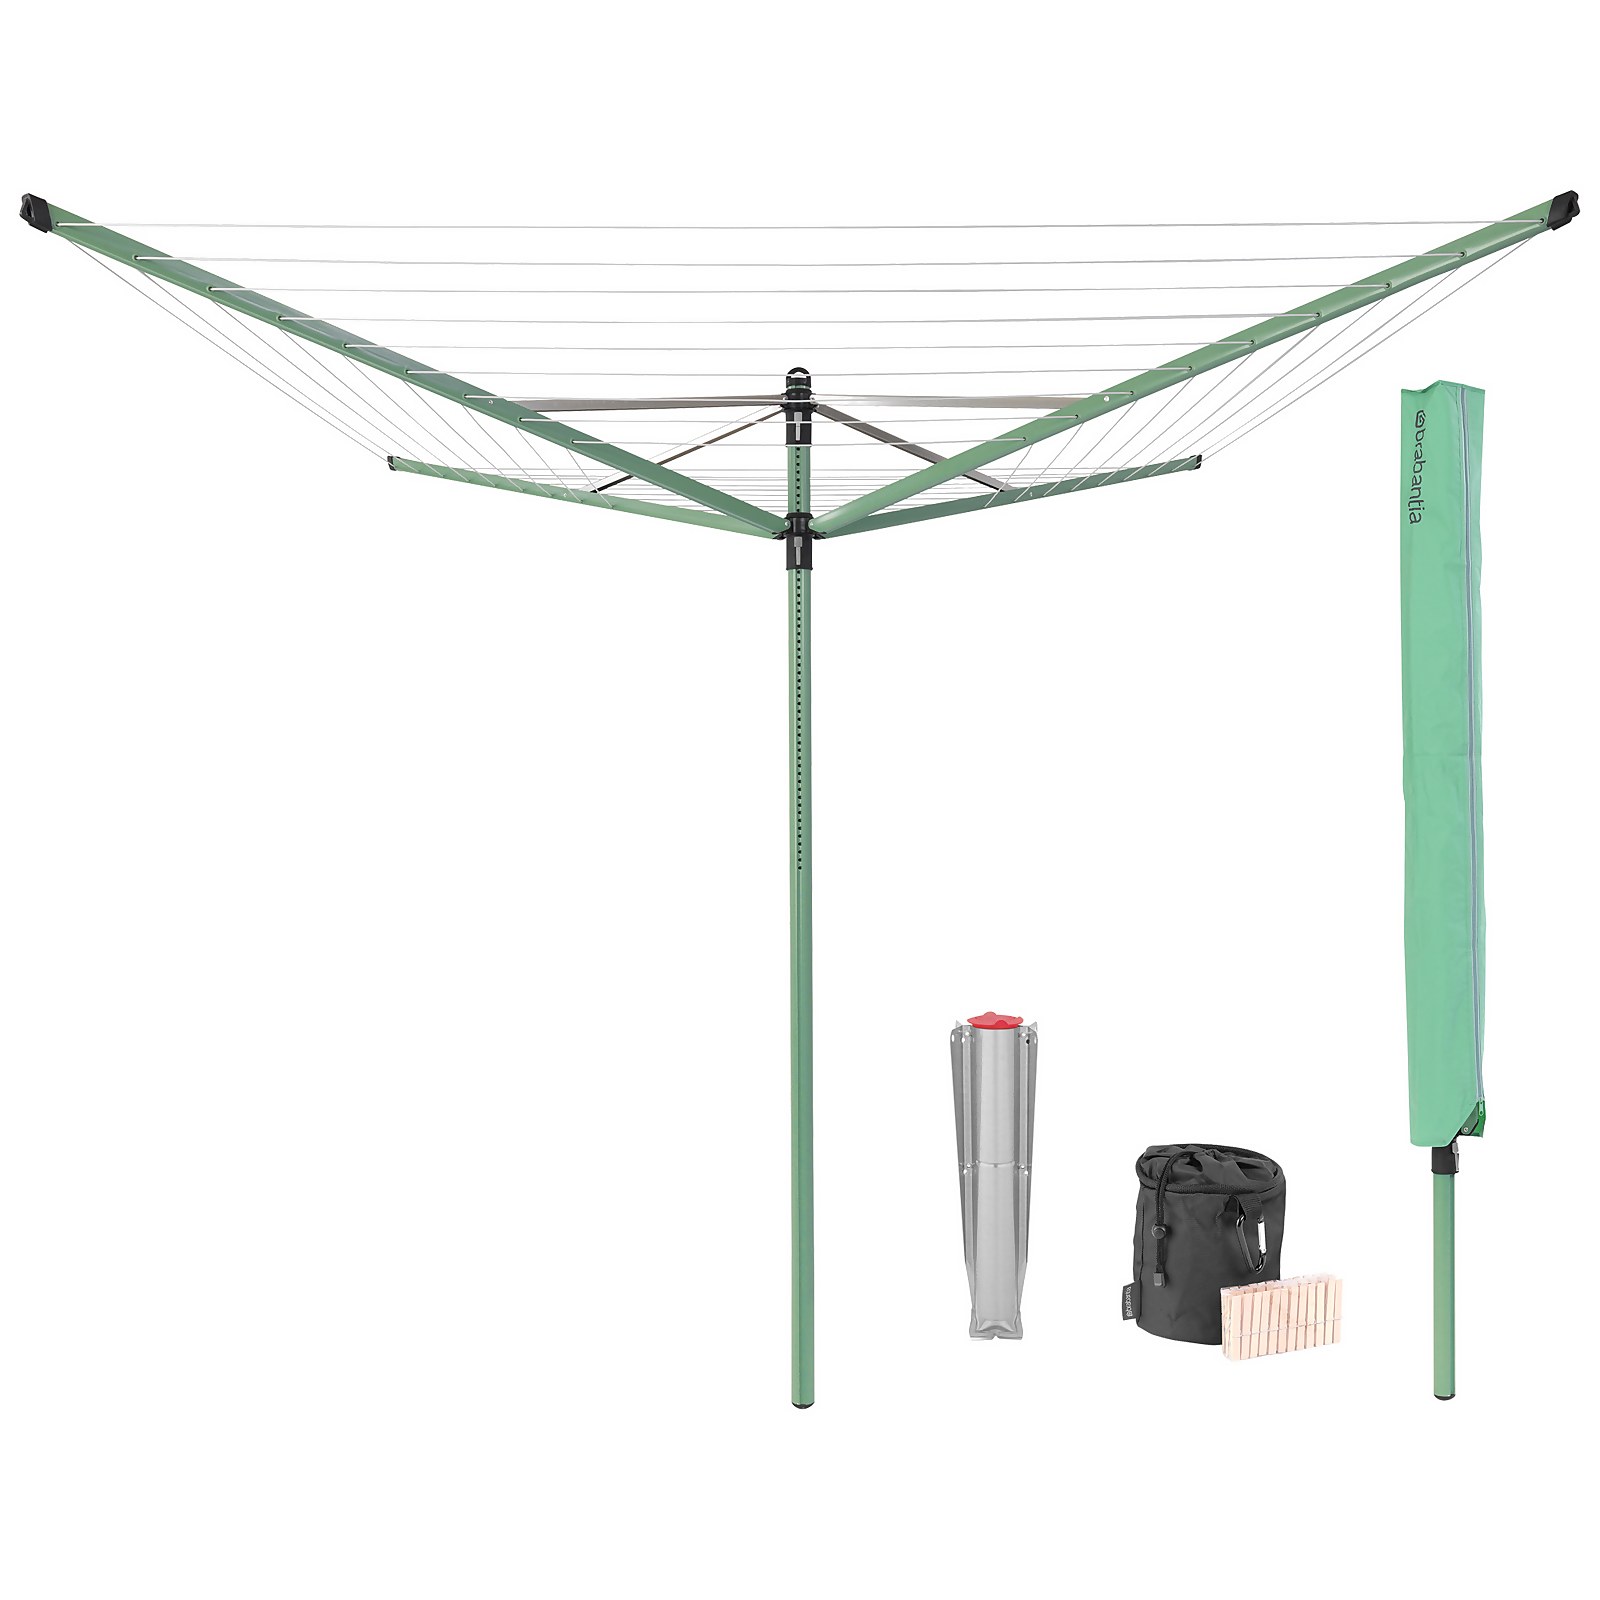 Brabantia Lift-O-Matic 50m Rotary Dryer with Ground Spike & Accessories - Green